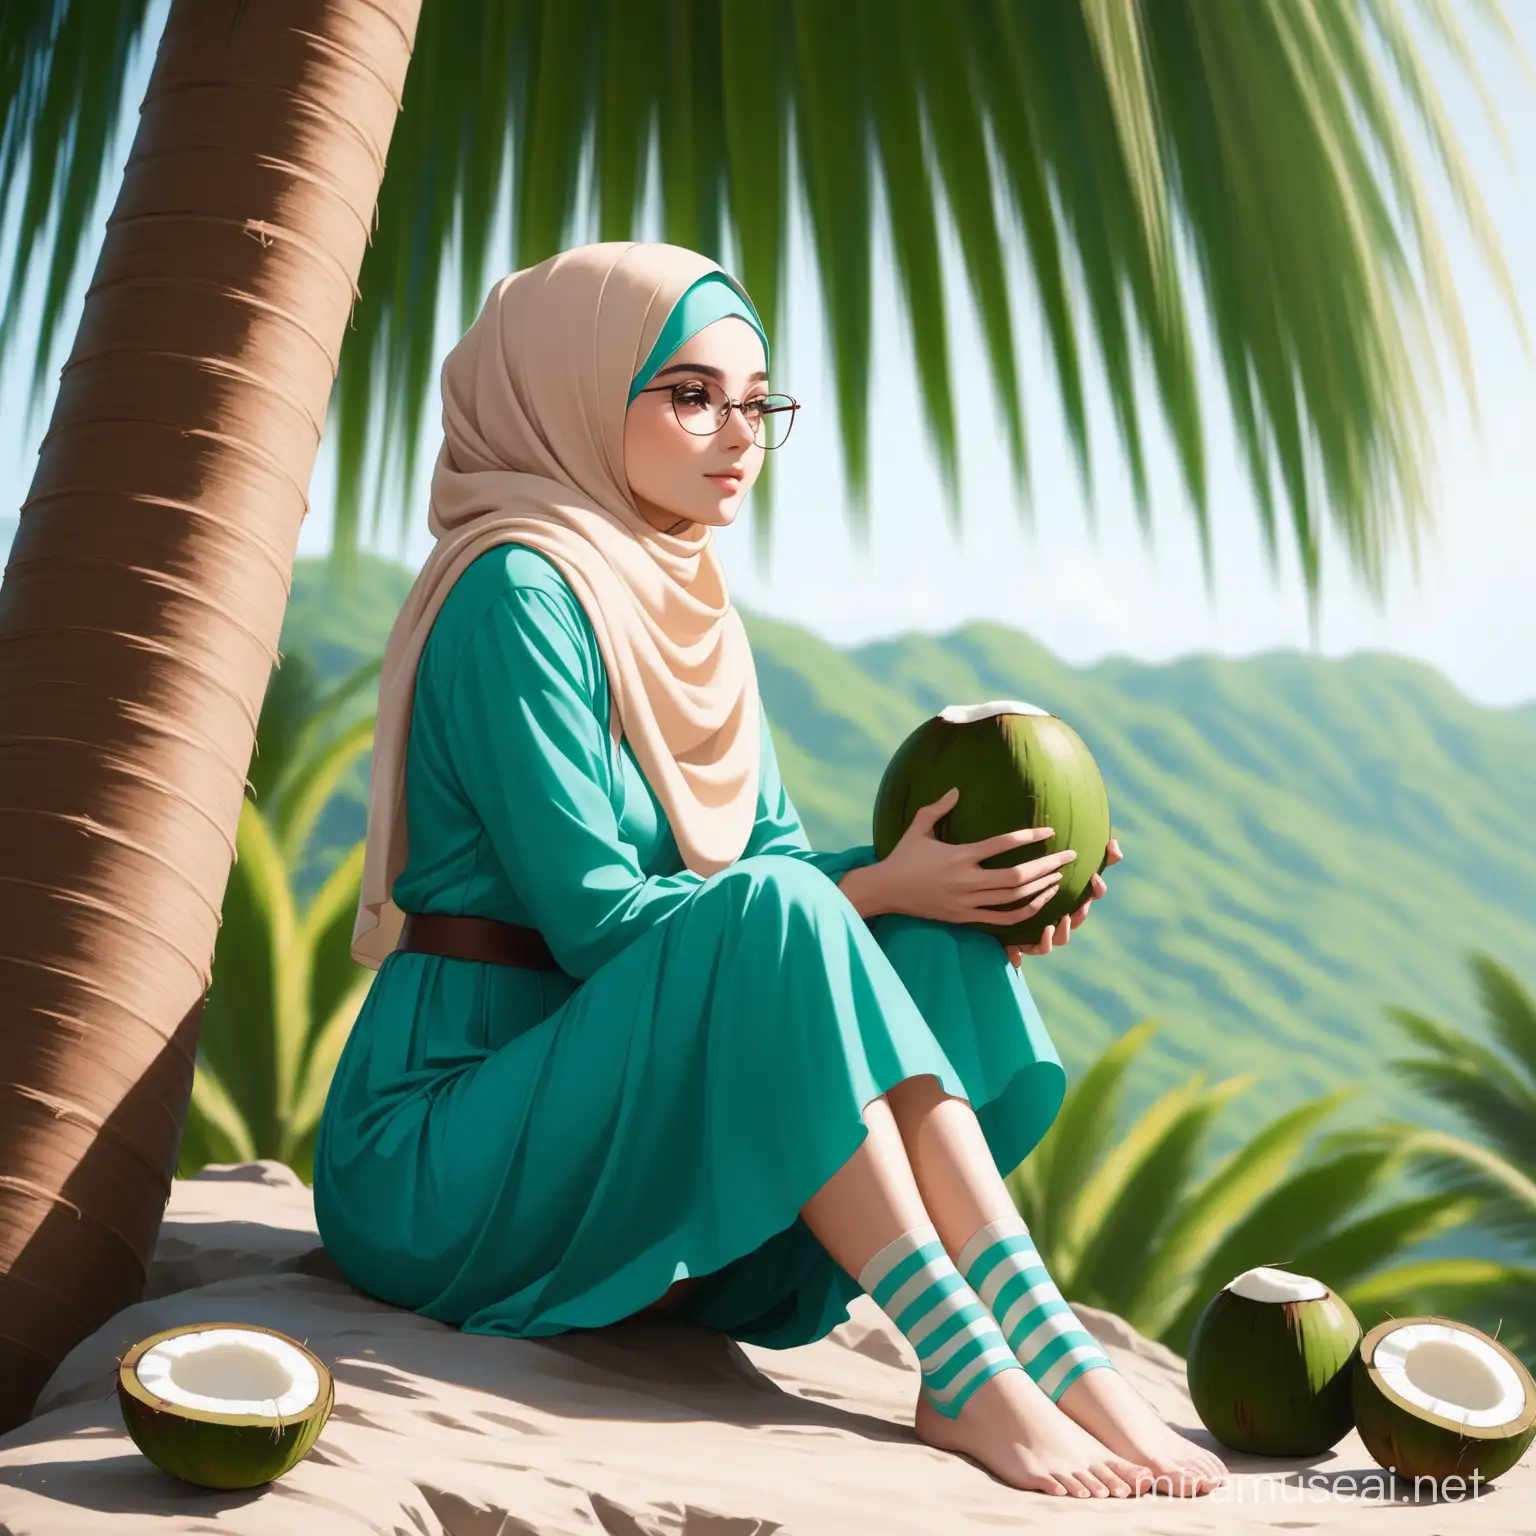 Stylish Muslim Woman Relaxing by Coconut Tree